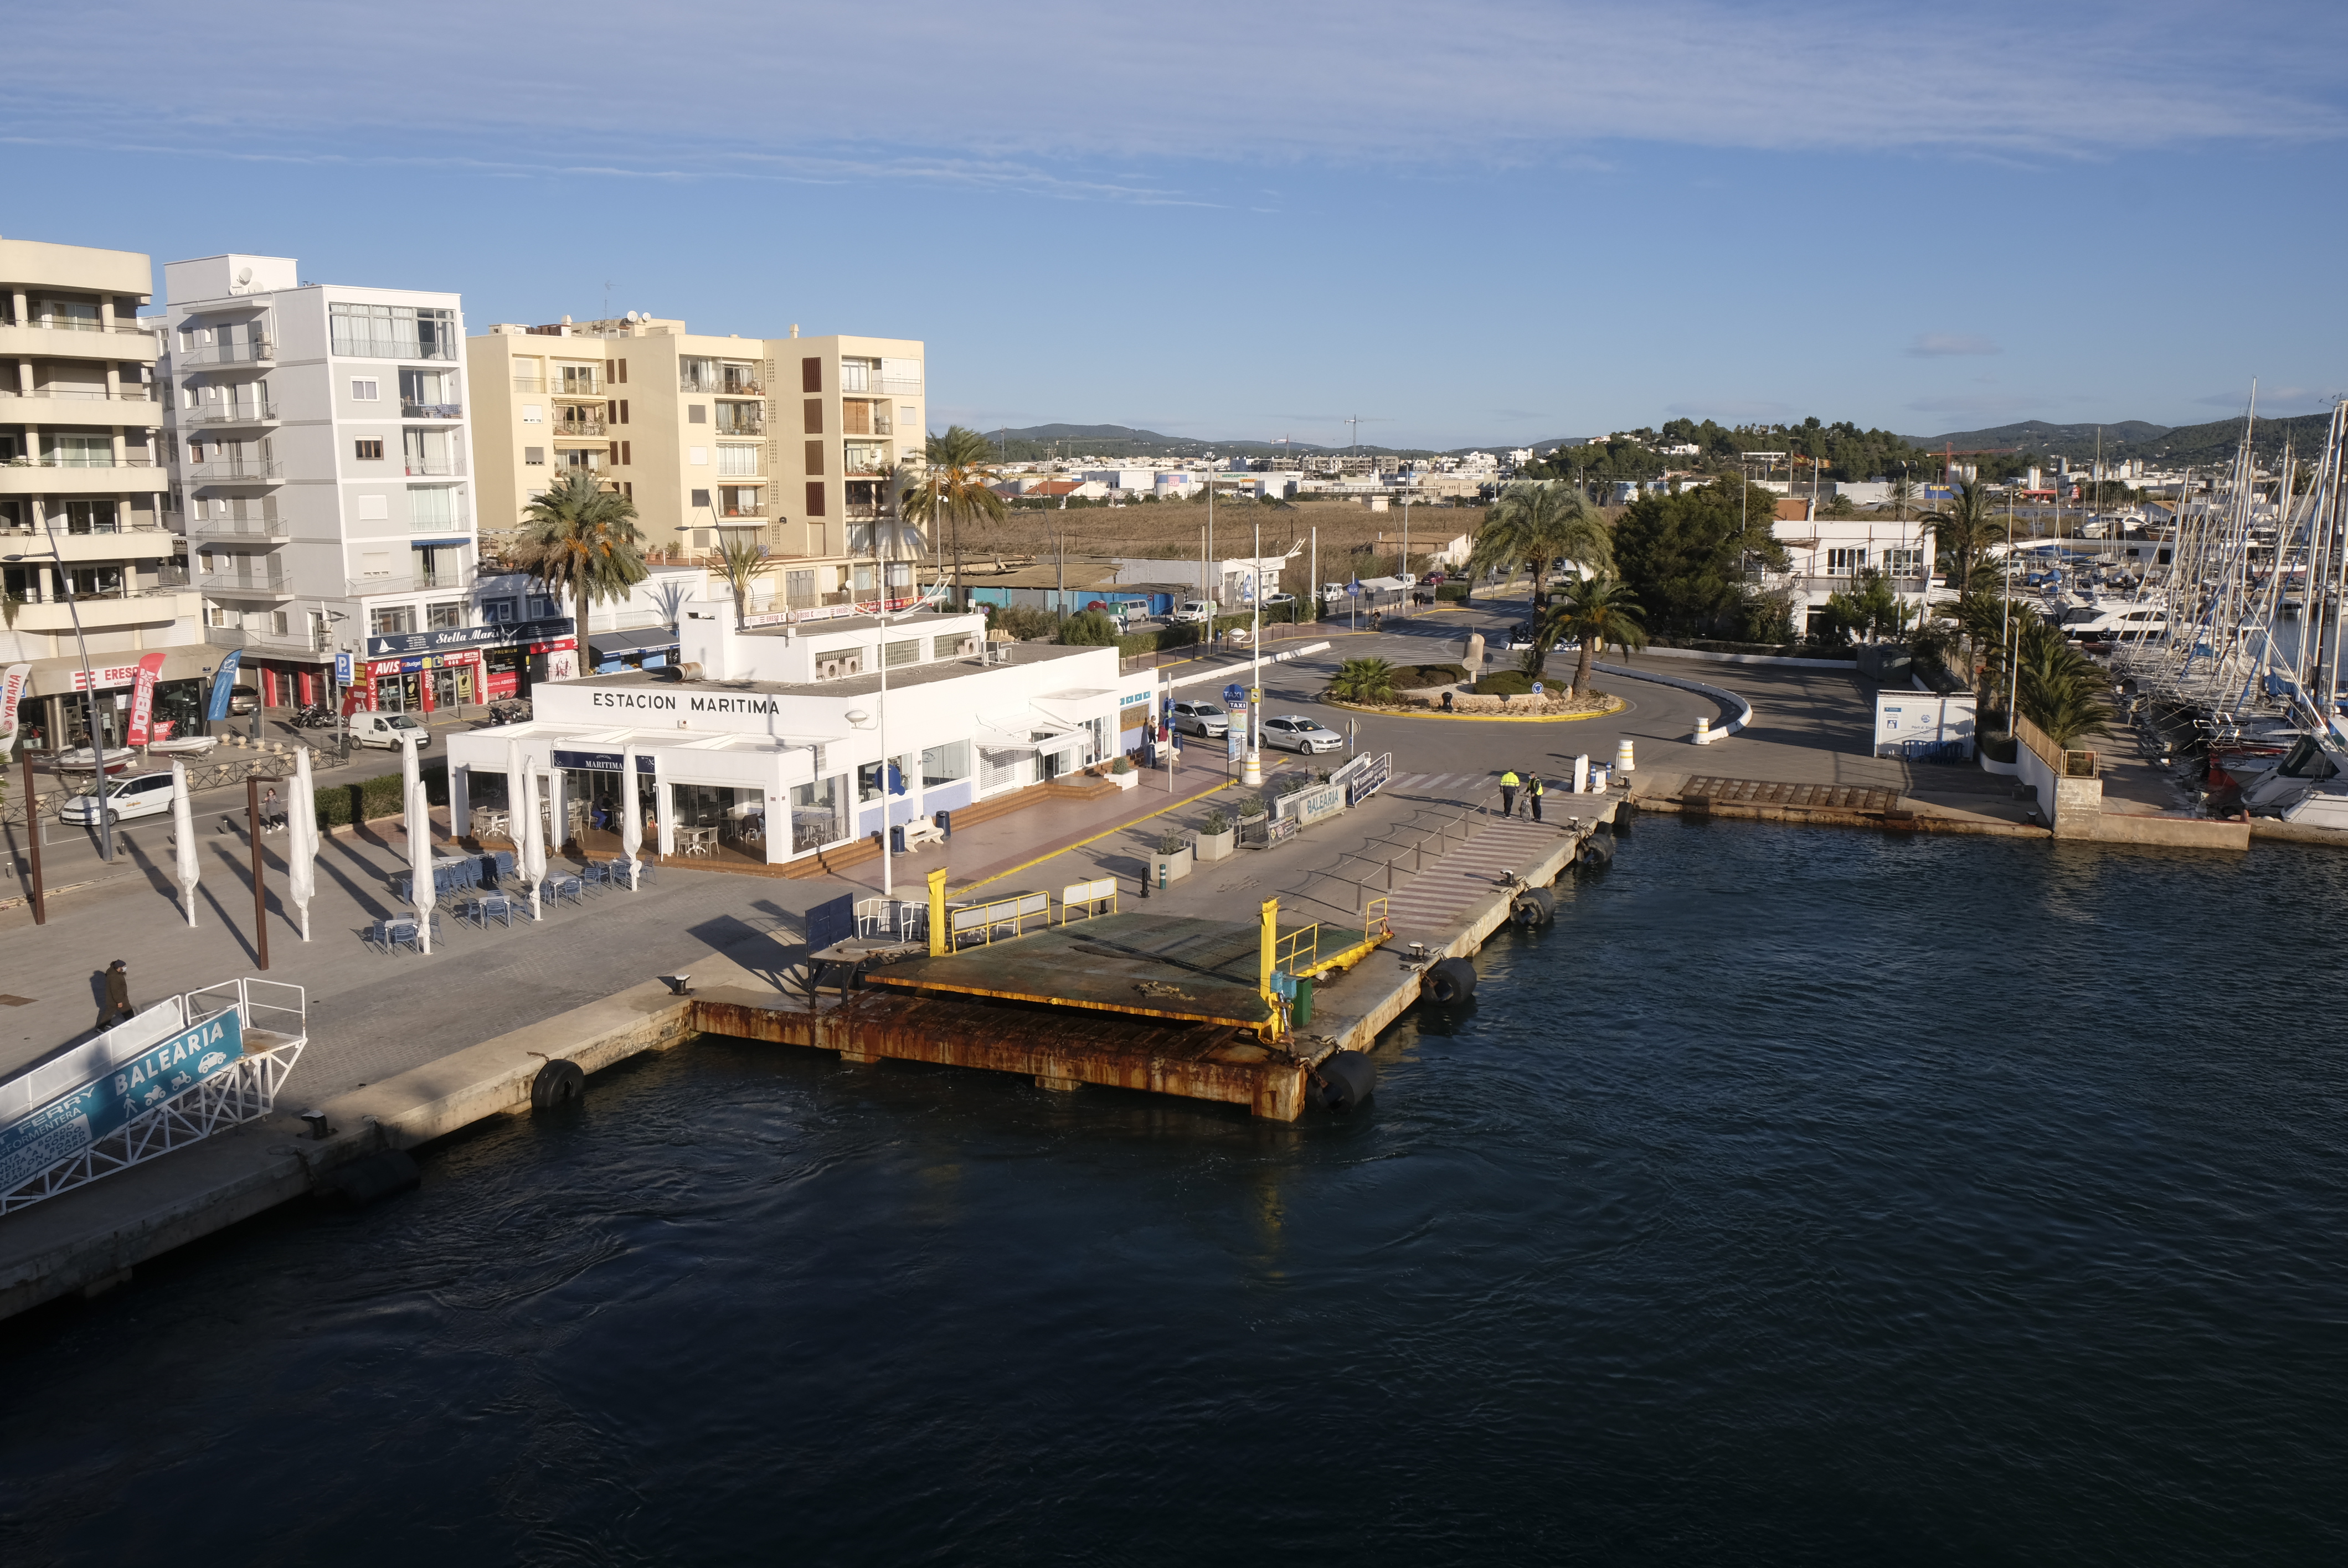 The proposal submitted by the company Calima la Savina S.L. Was chosen as the most advantageous solution for managing the cafeteria of the Maritime Station of Formentera in the port of Eivissa